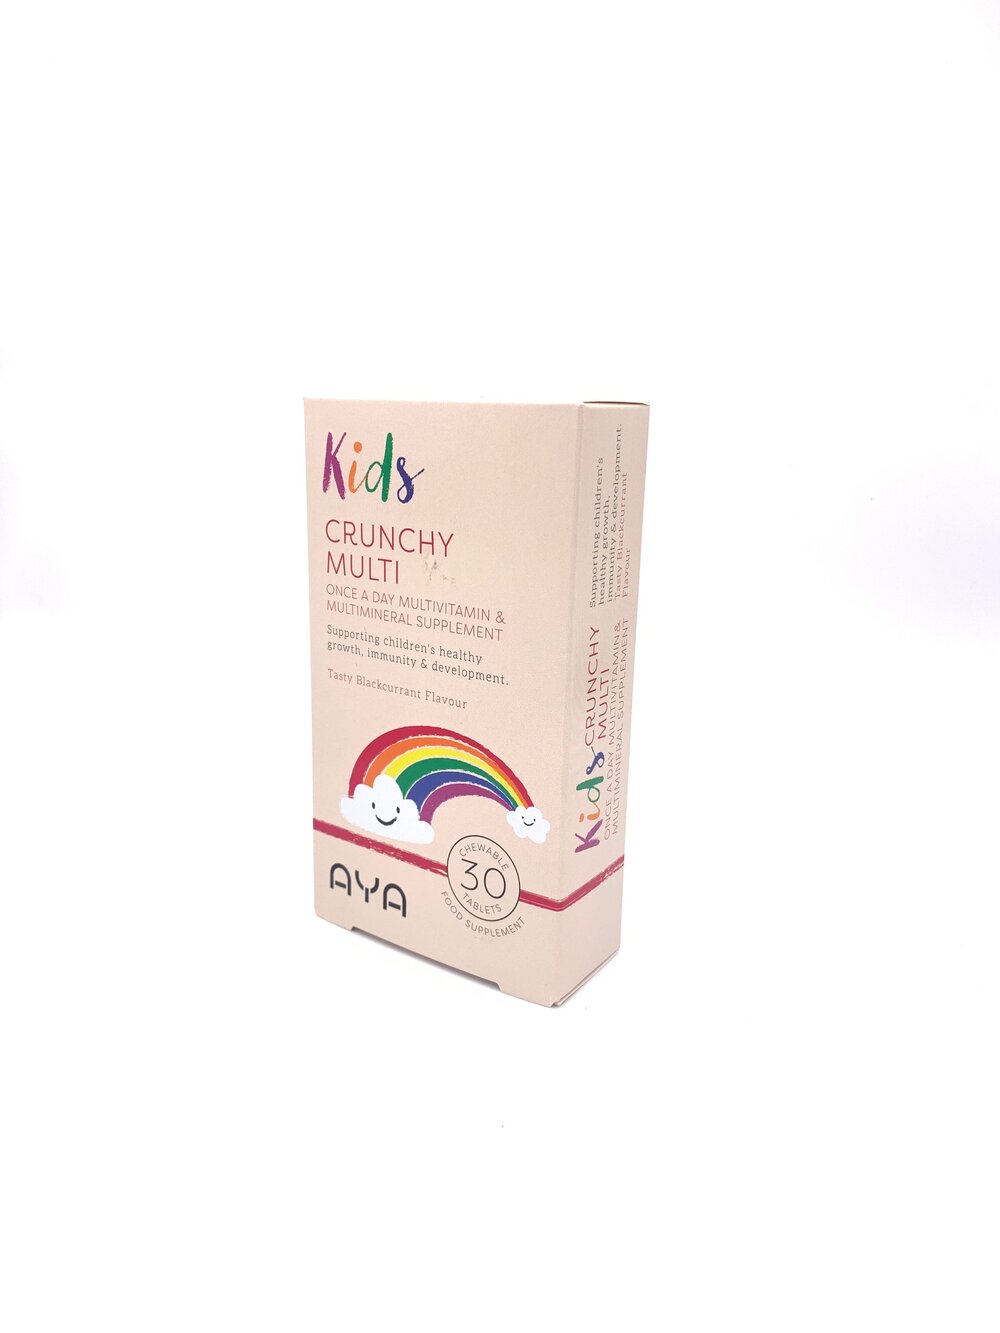 AYA Kids Crunchy Multi Once A Day Multivitamin & Multimineral Supplement- Blackcurrant Flavour